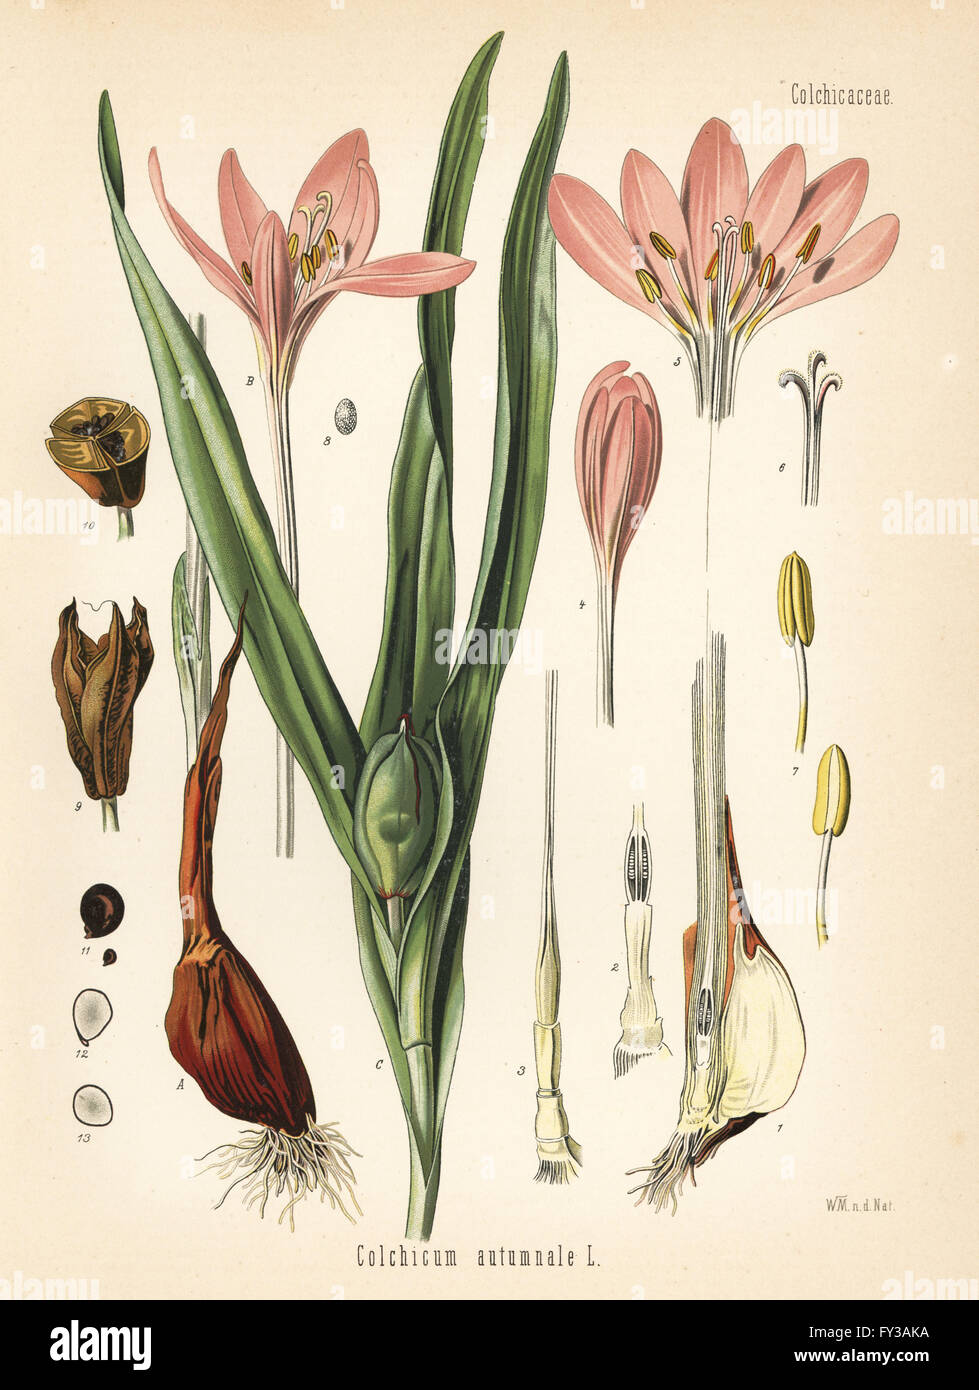 Meadow saffron or wild saffron, Colchicum autumnale. Chromolithograph after a botanical illustration by Walther Muller from Hermann Adolph Koehler's Medicinal Plants, edited by Gustav Pabst, Koehler, Germany, 1887. Stock Photo